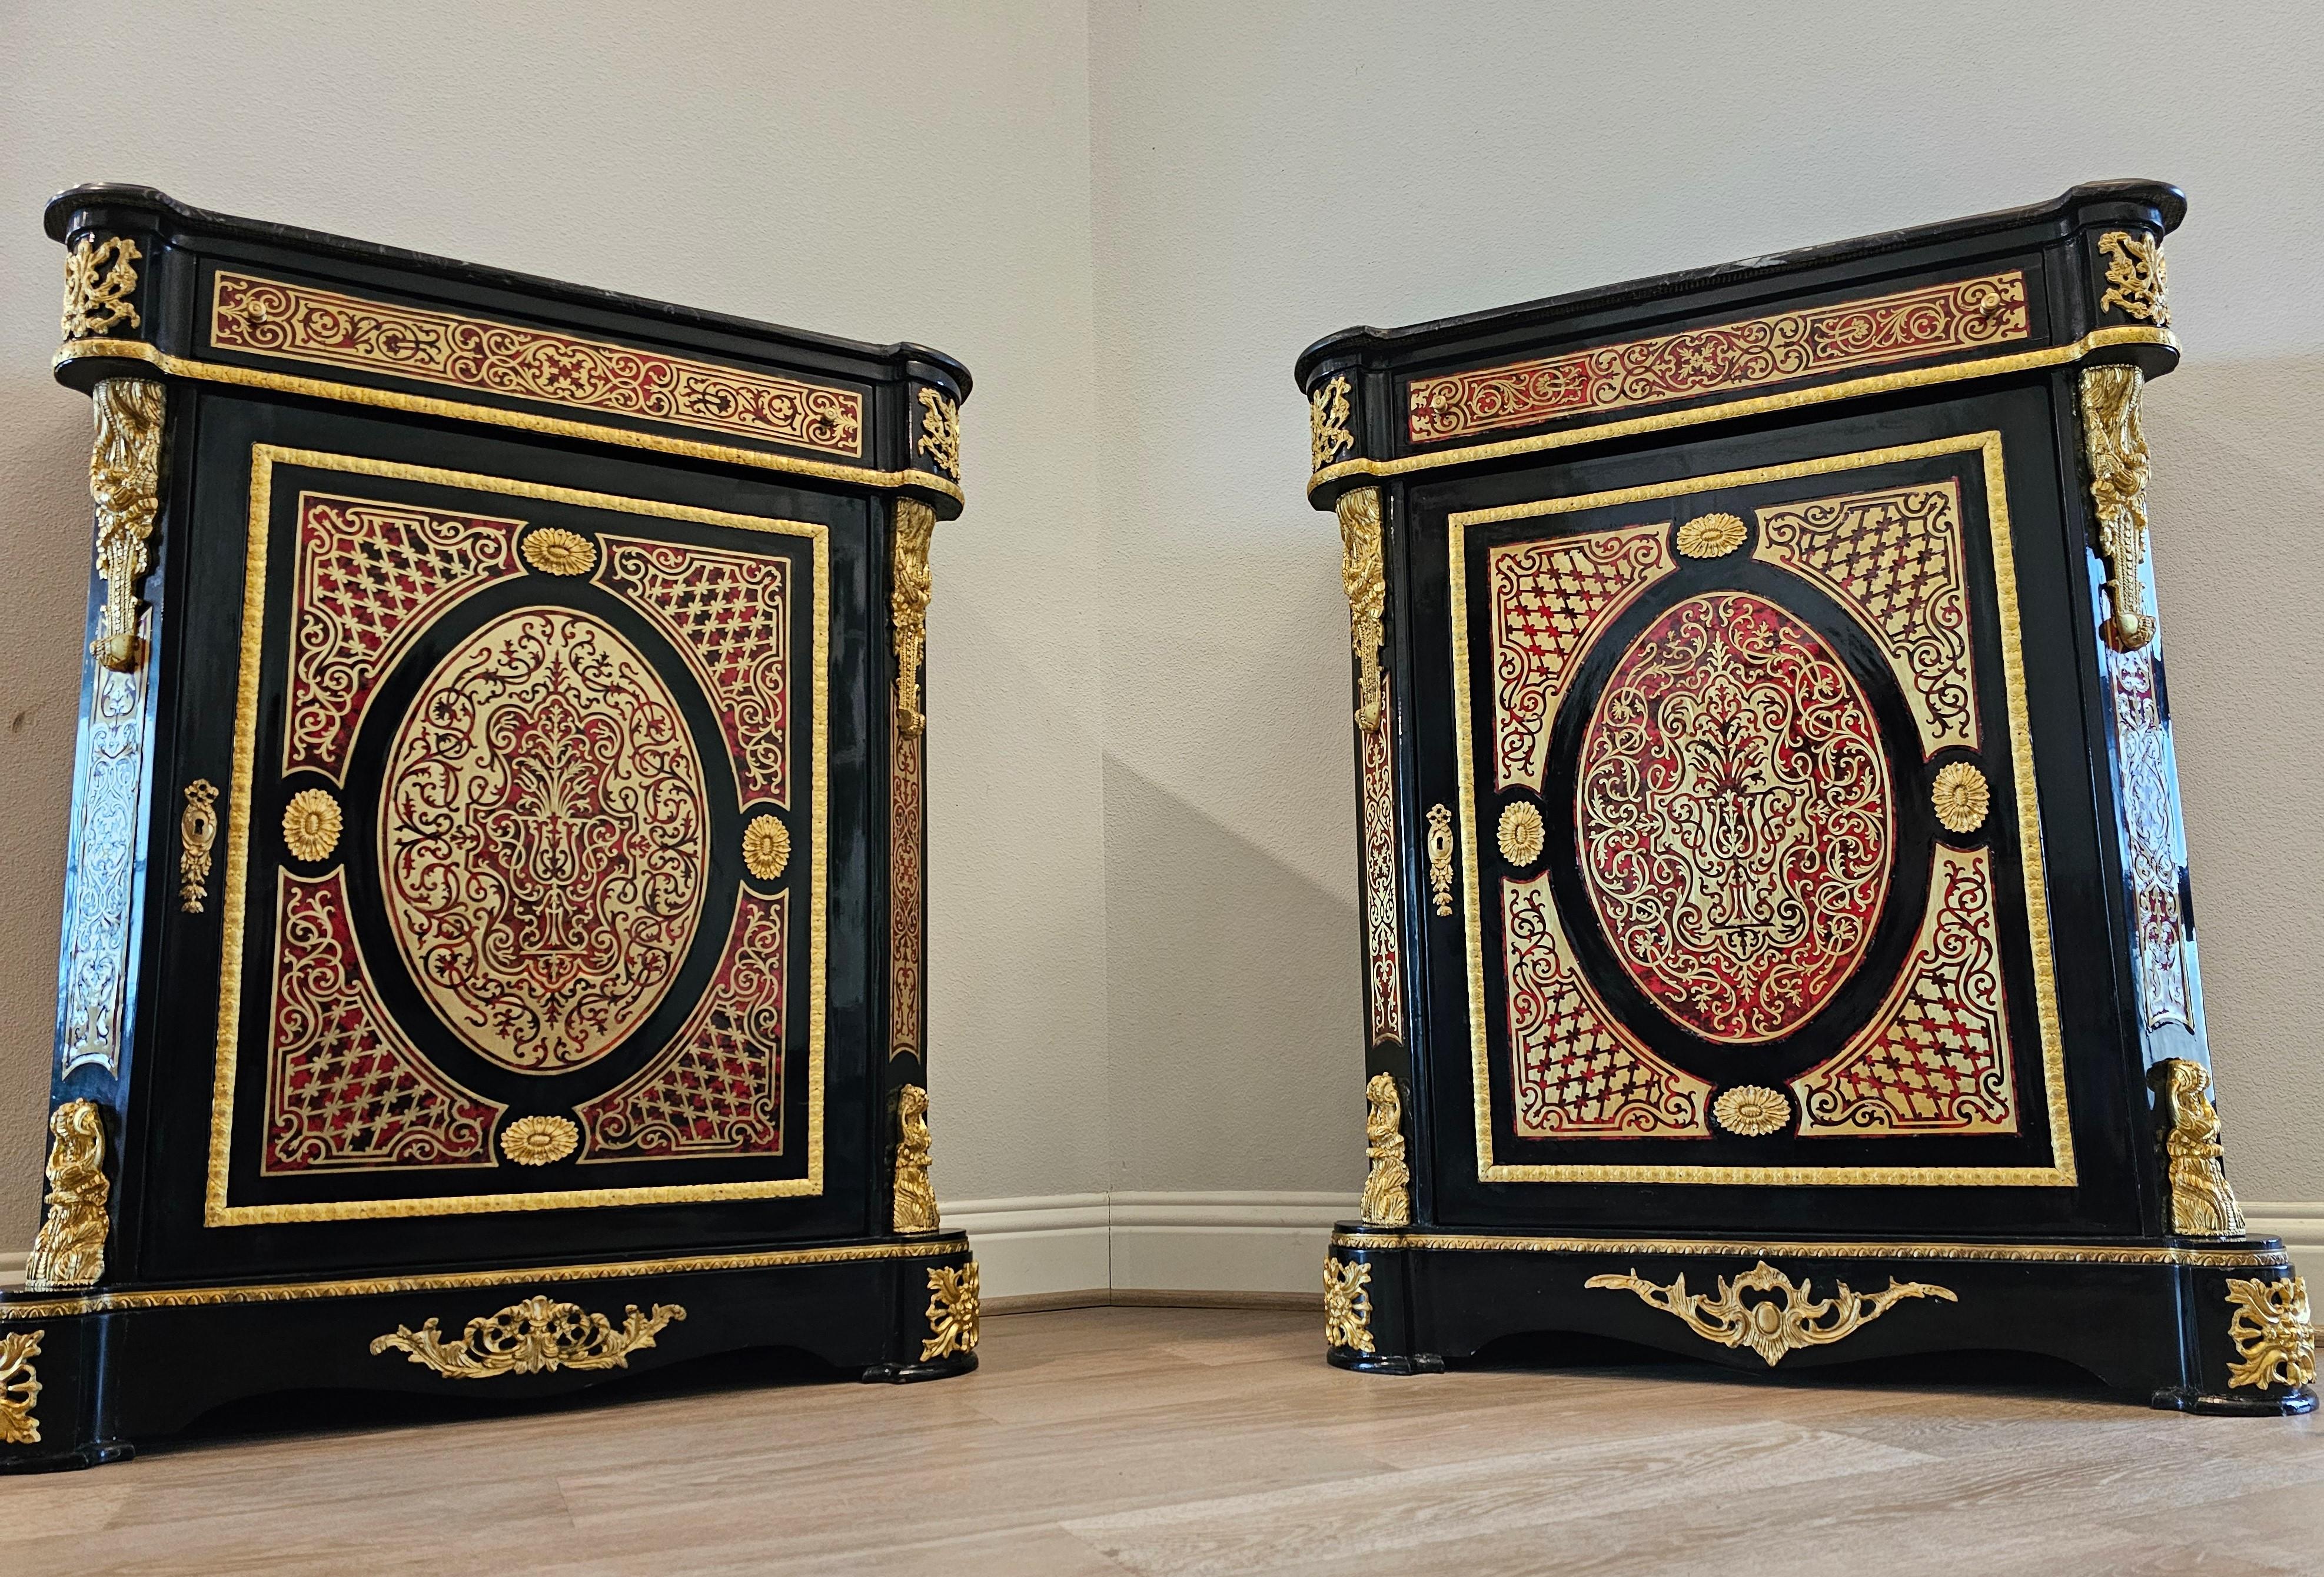 A pair of striking Napoleon III style ebonized cabinets, with Boulle style faux tortoiseshell cut-brass marquetry, gilt brass mounted black lacquered solid wood construction, topped with a shaped black marble top with white veining.

Mid-19th